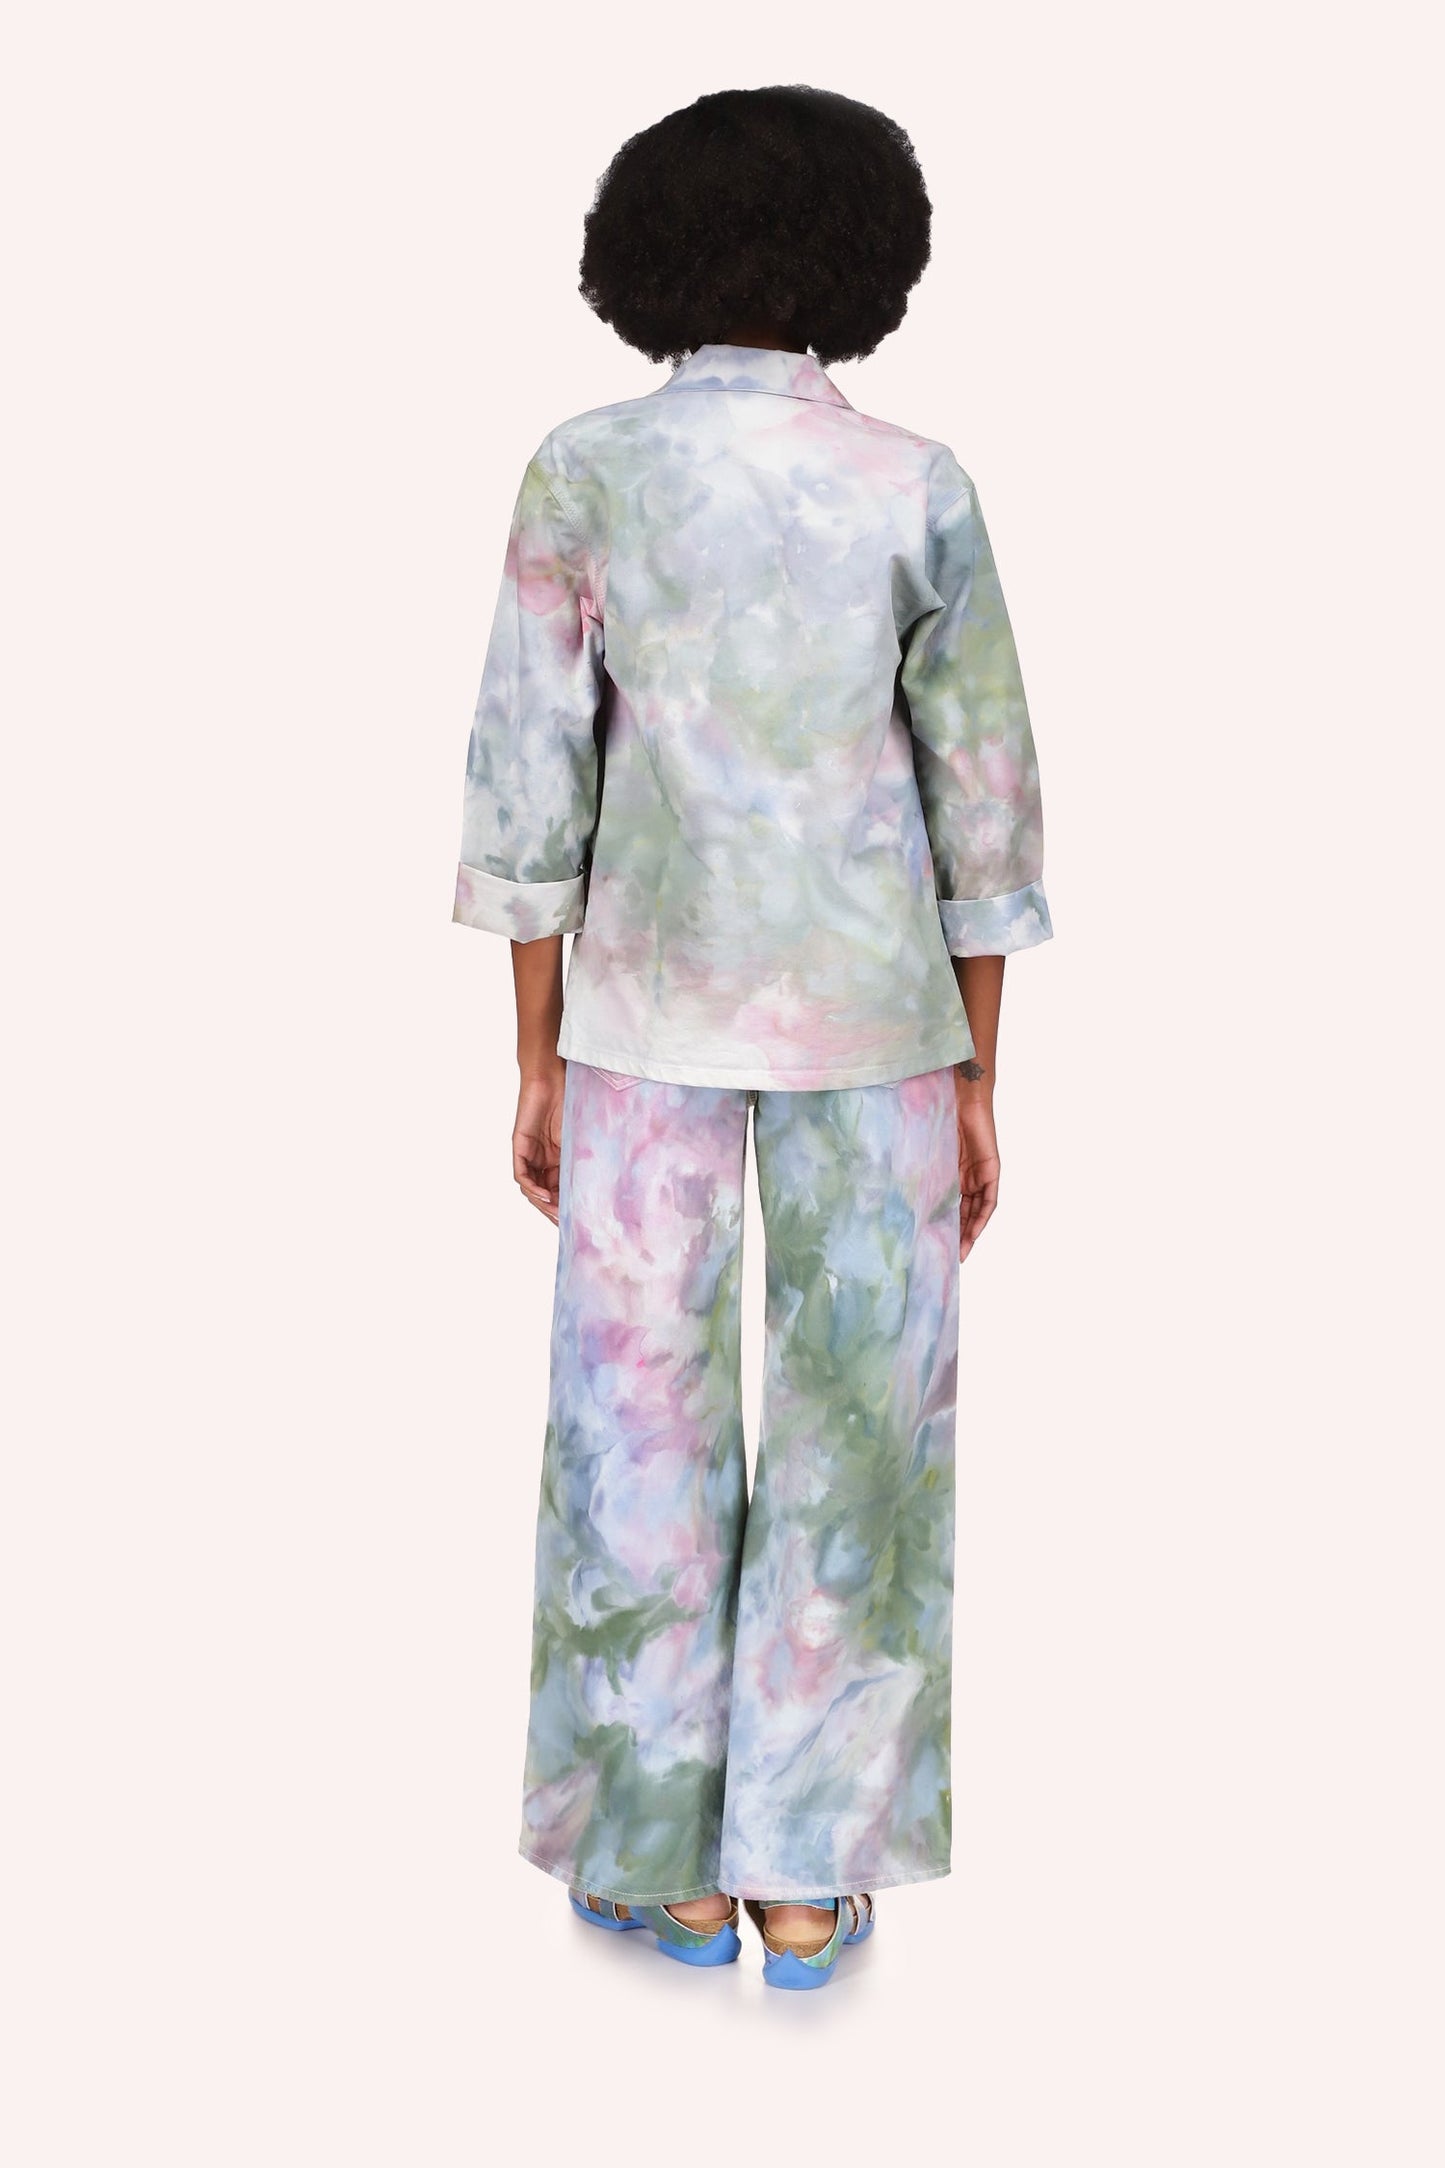 Ocean Tie Dye Jacket, green floral design with touch of pink, waist long, High collar in the back